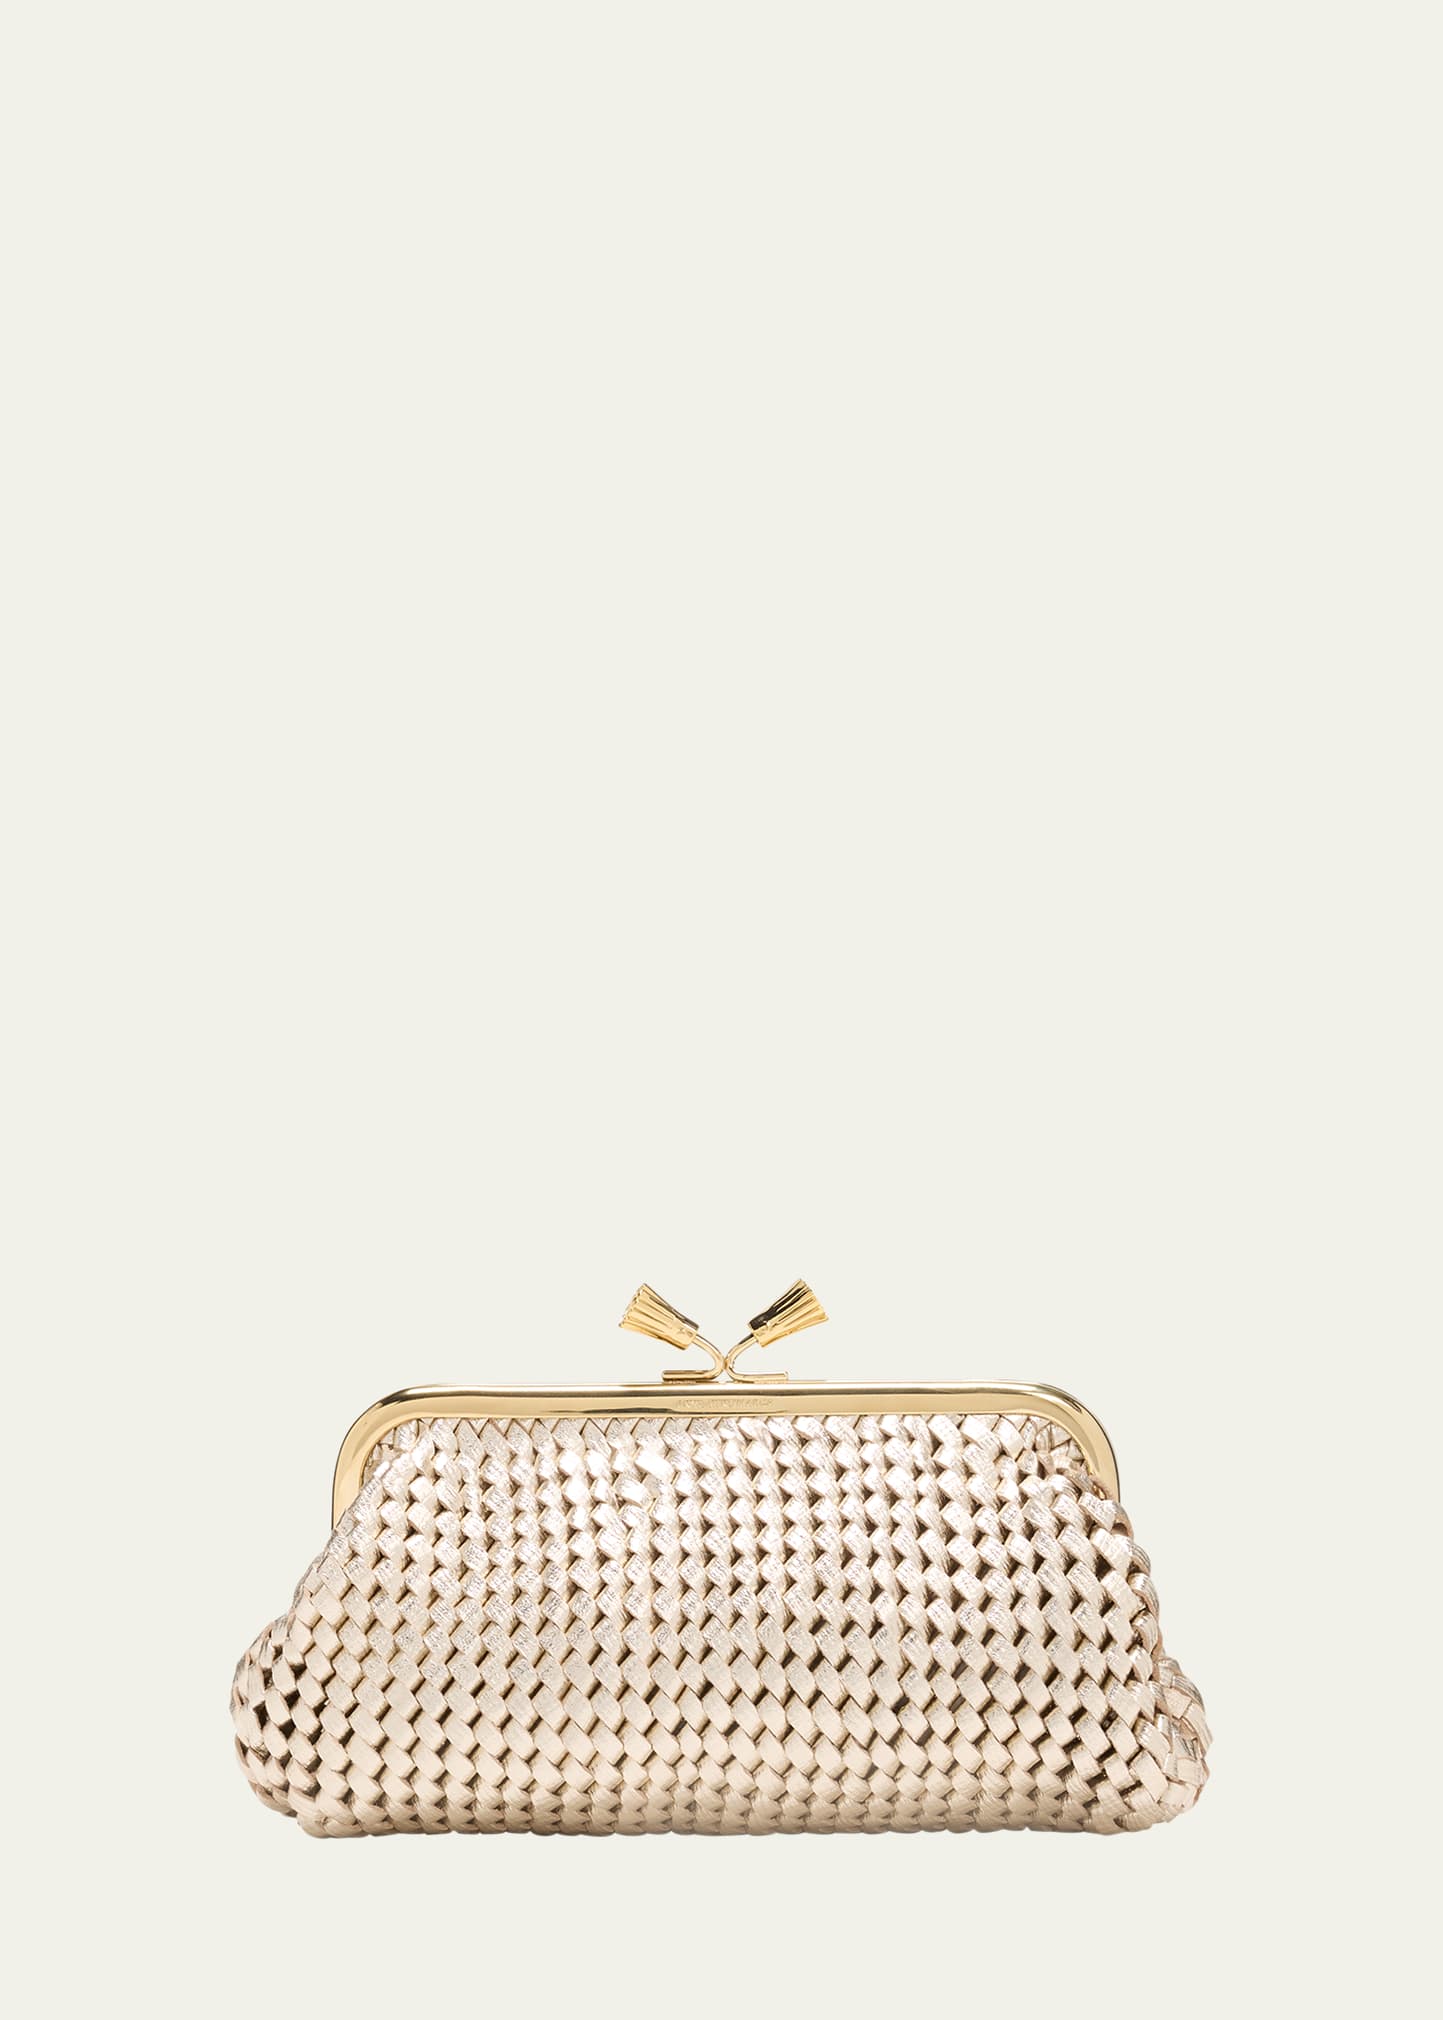 Anya Hindmarch Maud Plaited Metallic Leather Clutch Bag In Gold